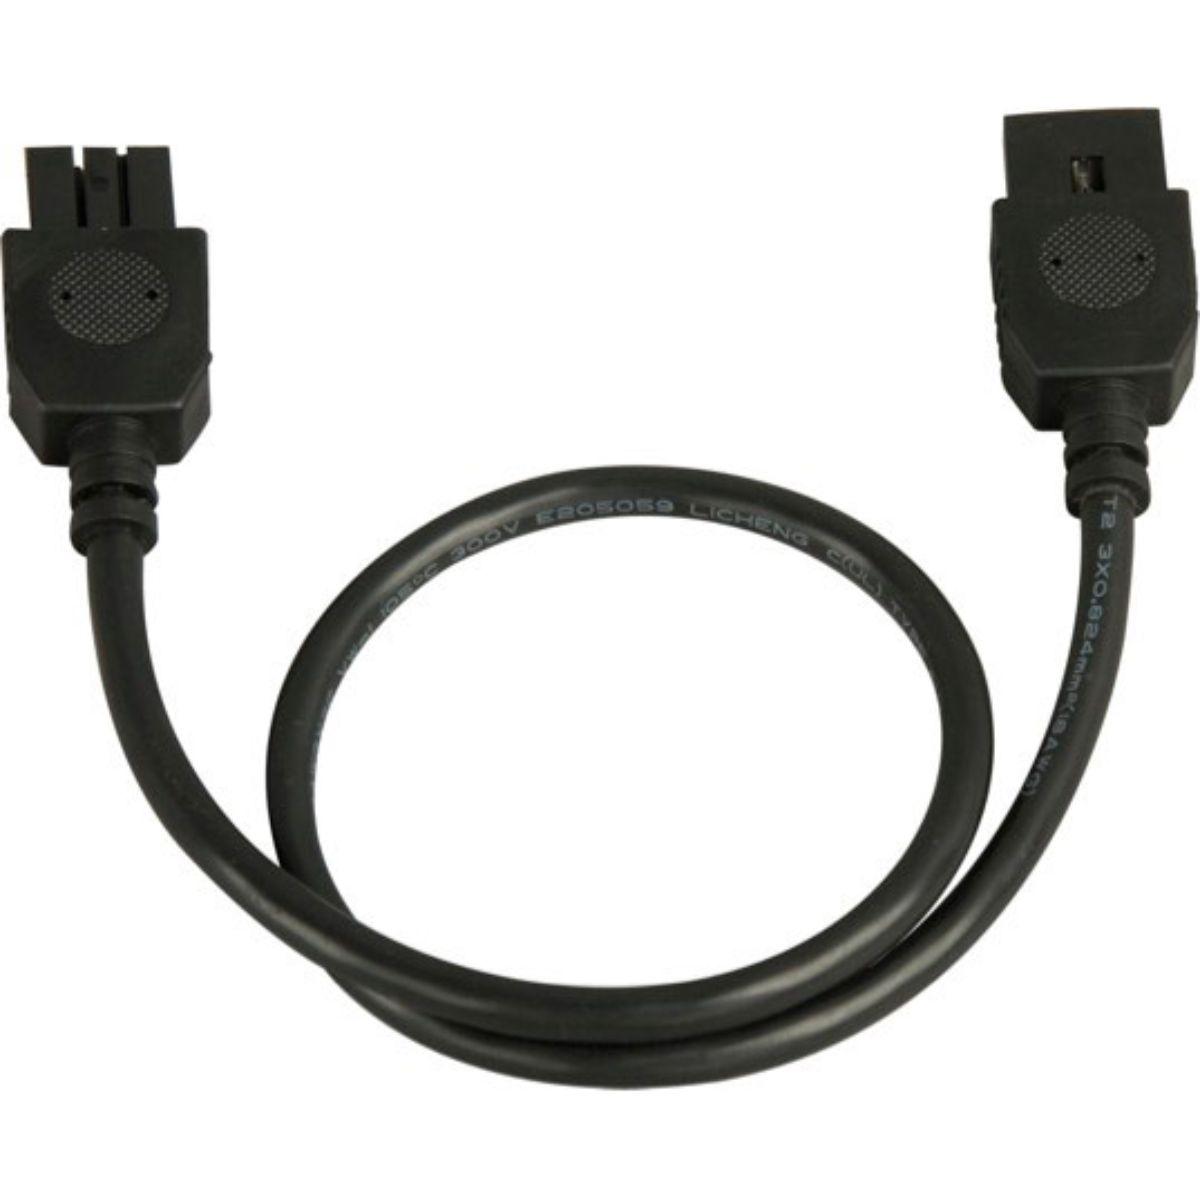 CounterMax 24in. Connecting Cord, Black